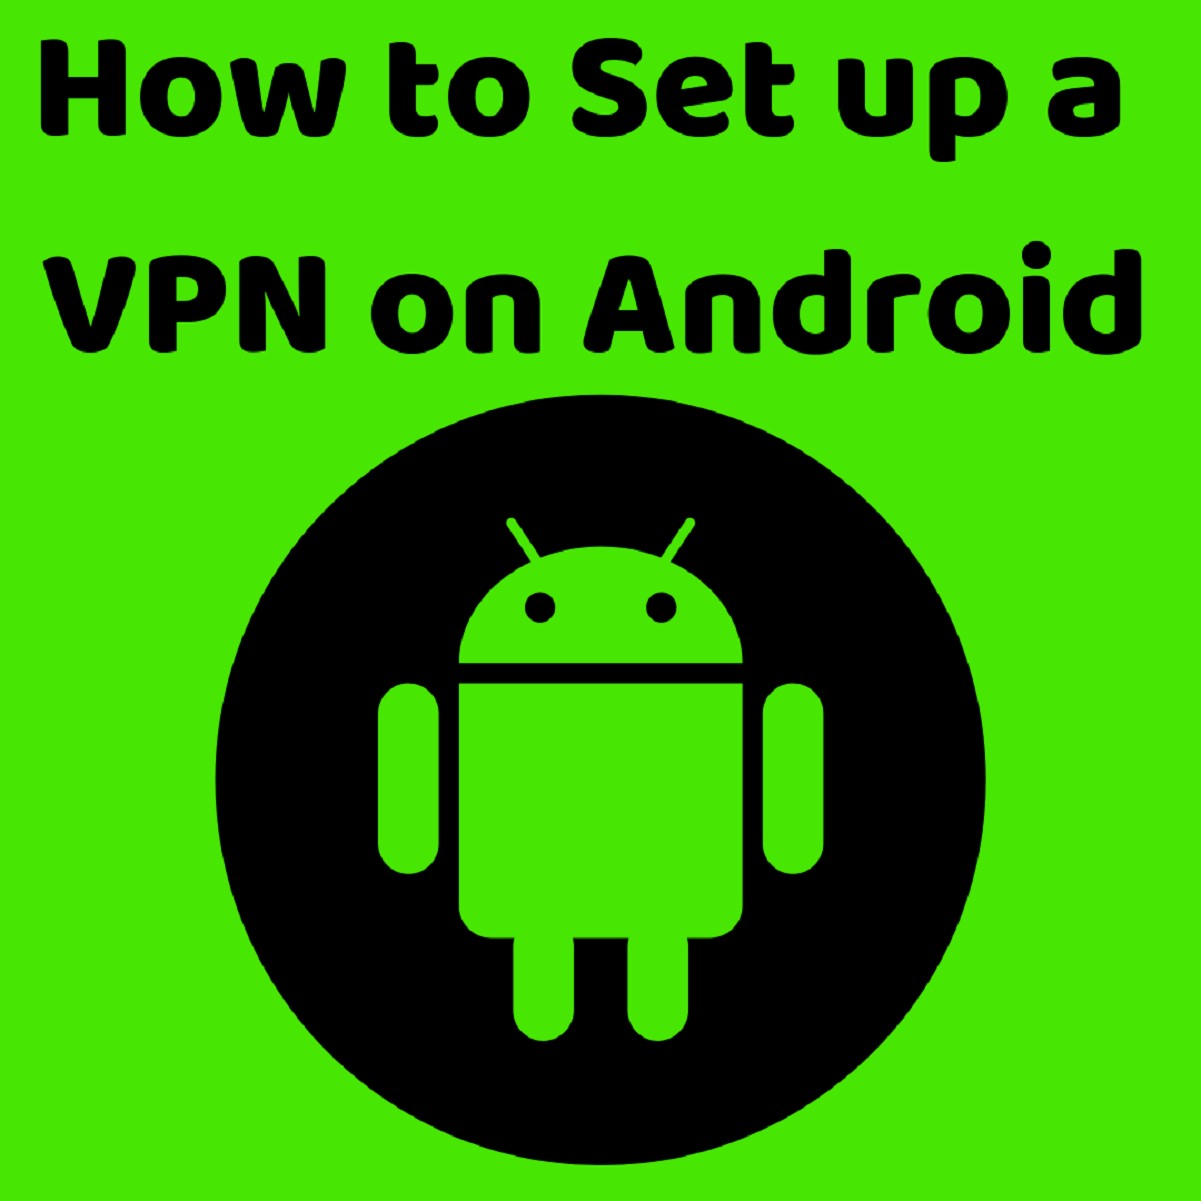 How to Setup a VPN on Android without Puzzling your Mind